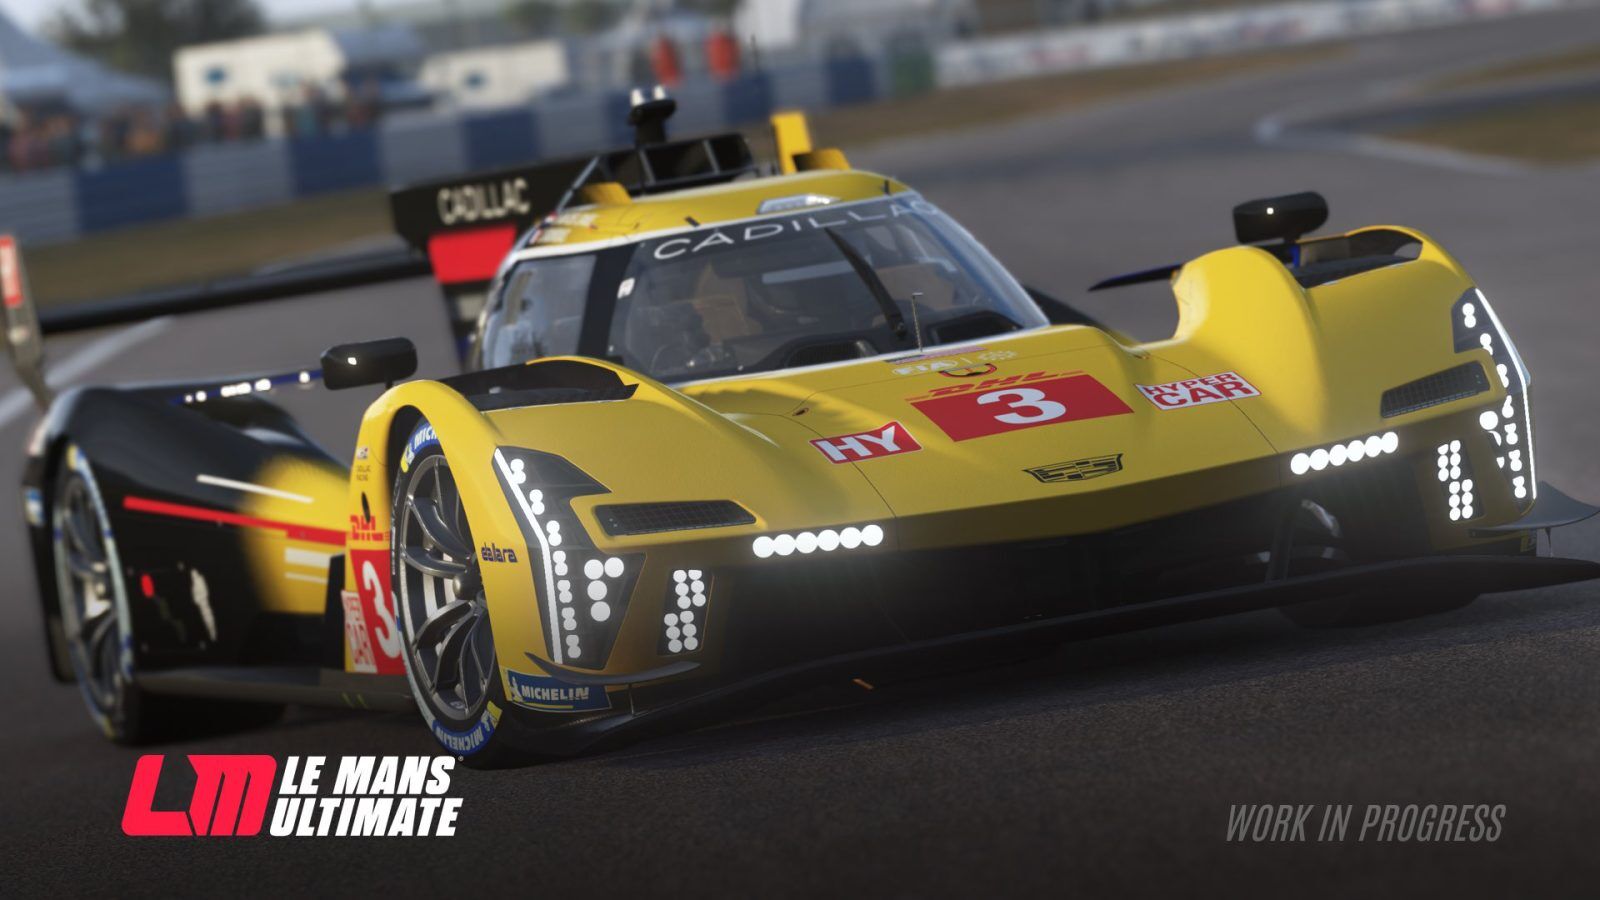 Le Mans Ultimate - Sebring, Corvette and Cadillac Previewed, Roadmap Expected OT